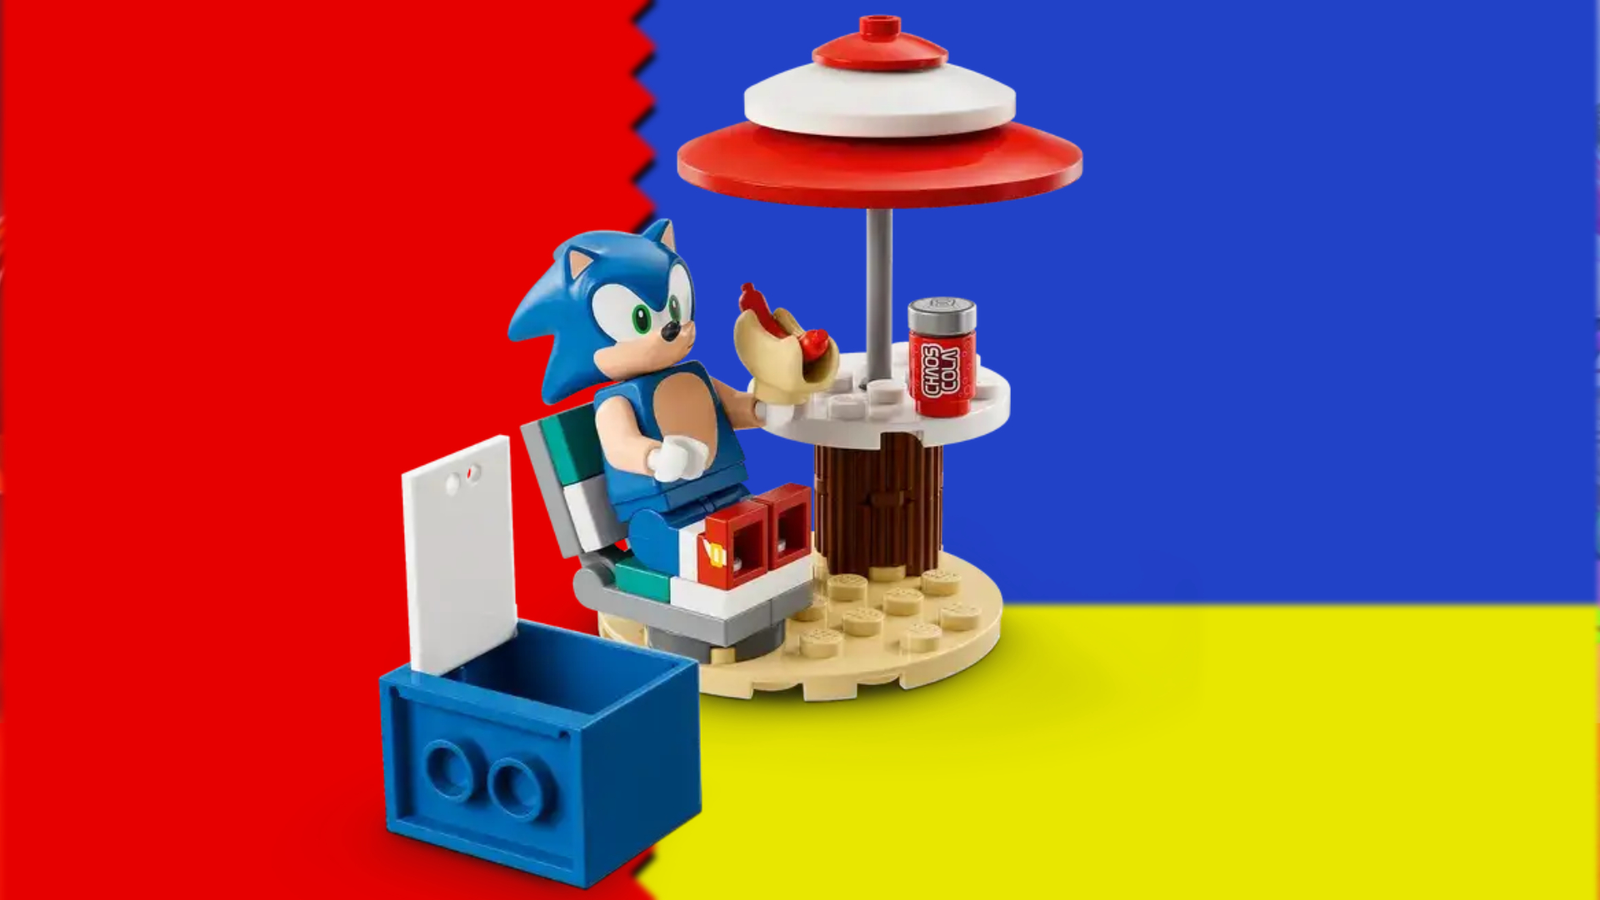 Sonic's four new Lego kits are traditional playsets for kids, not